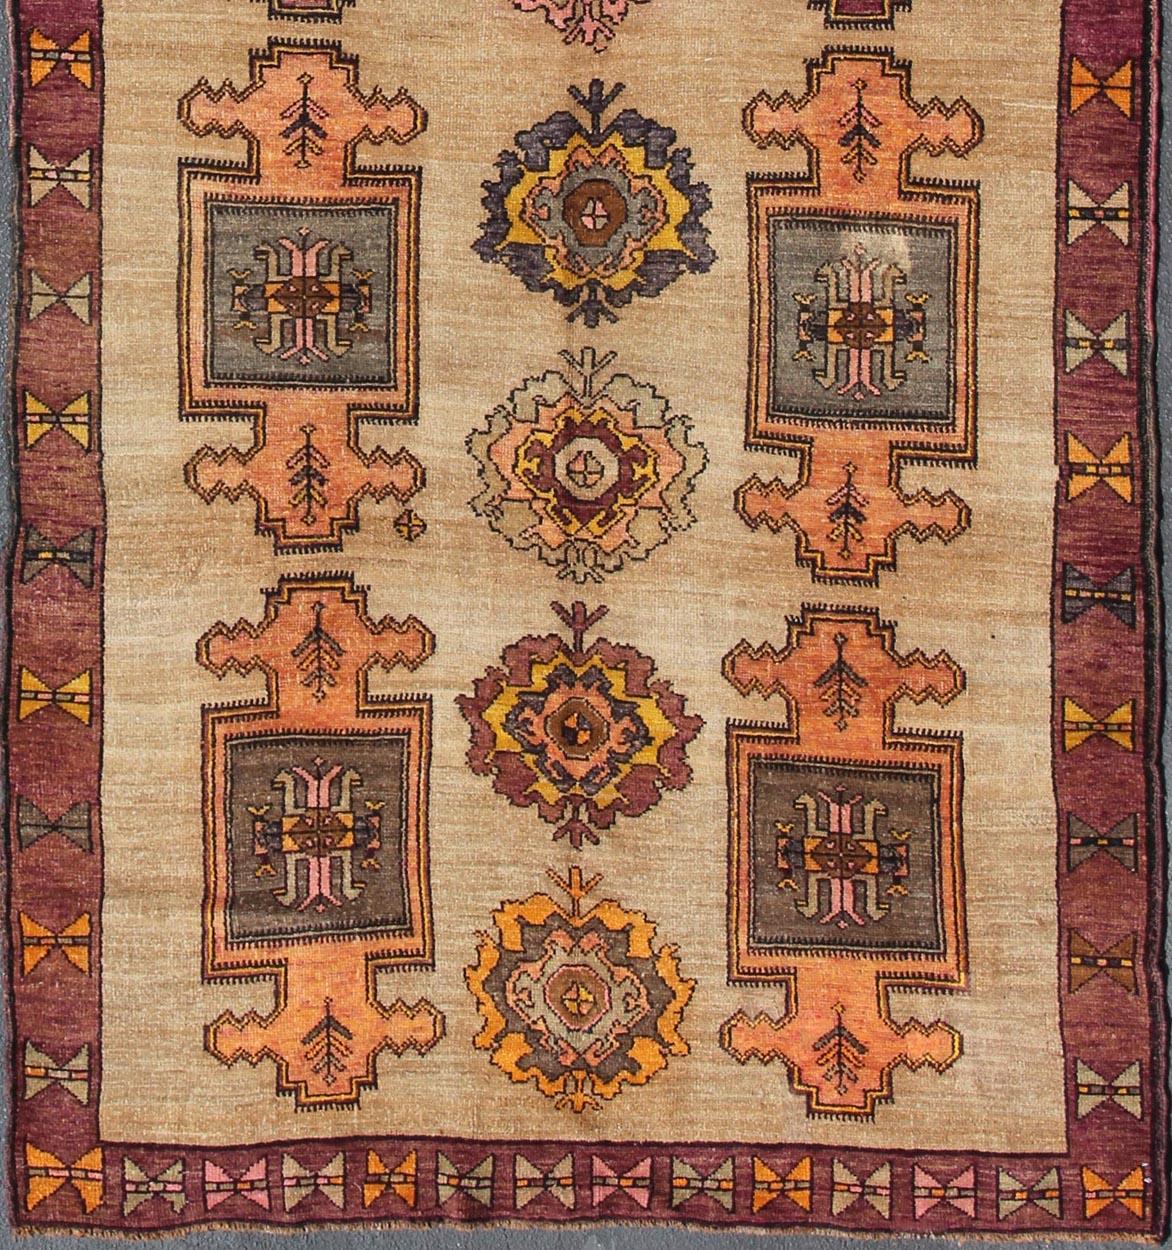 Vintage Turkish Oushak runner with all-over geometric design in tan, orange, pink, yellow, purple and gray, rug en-508, country of origin / type: Turkey / Oushak, circa mid-20th century

This Turkish Oushak runner features an all-over pattern of